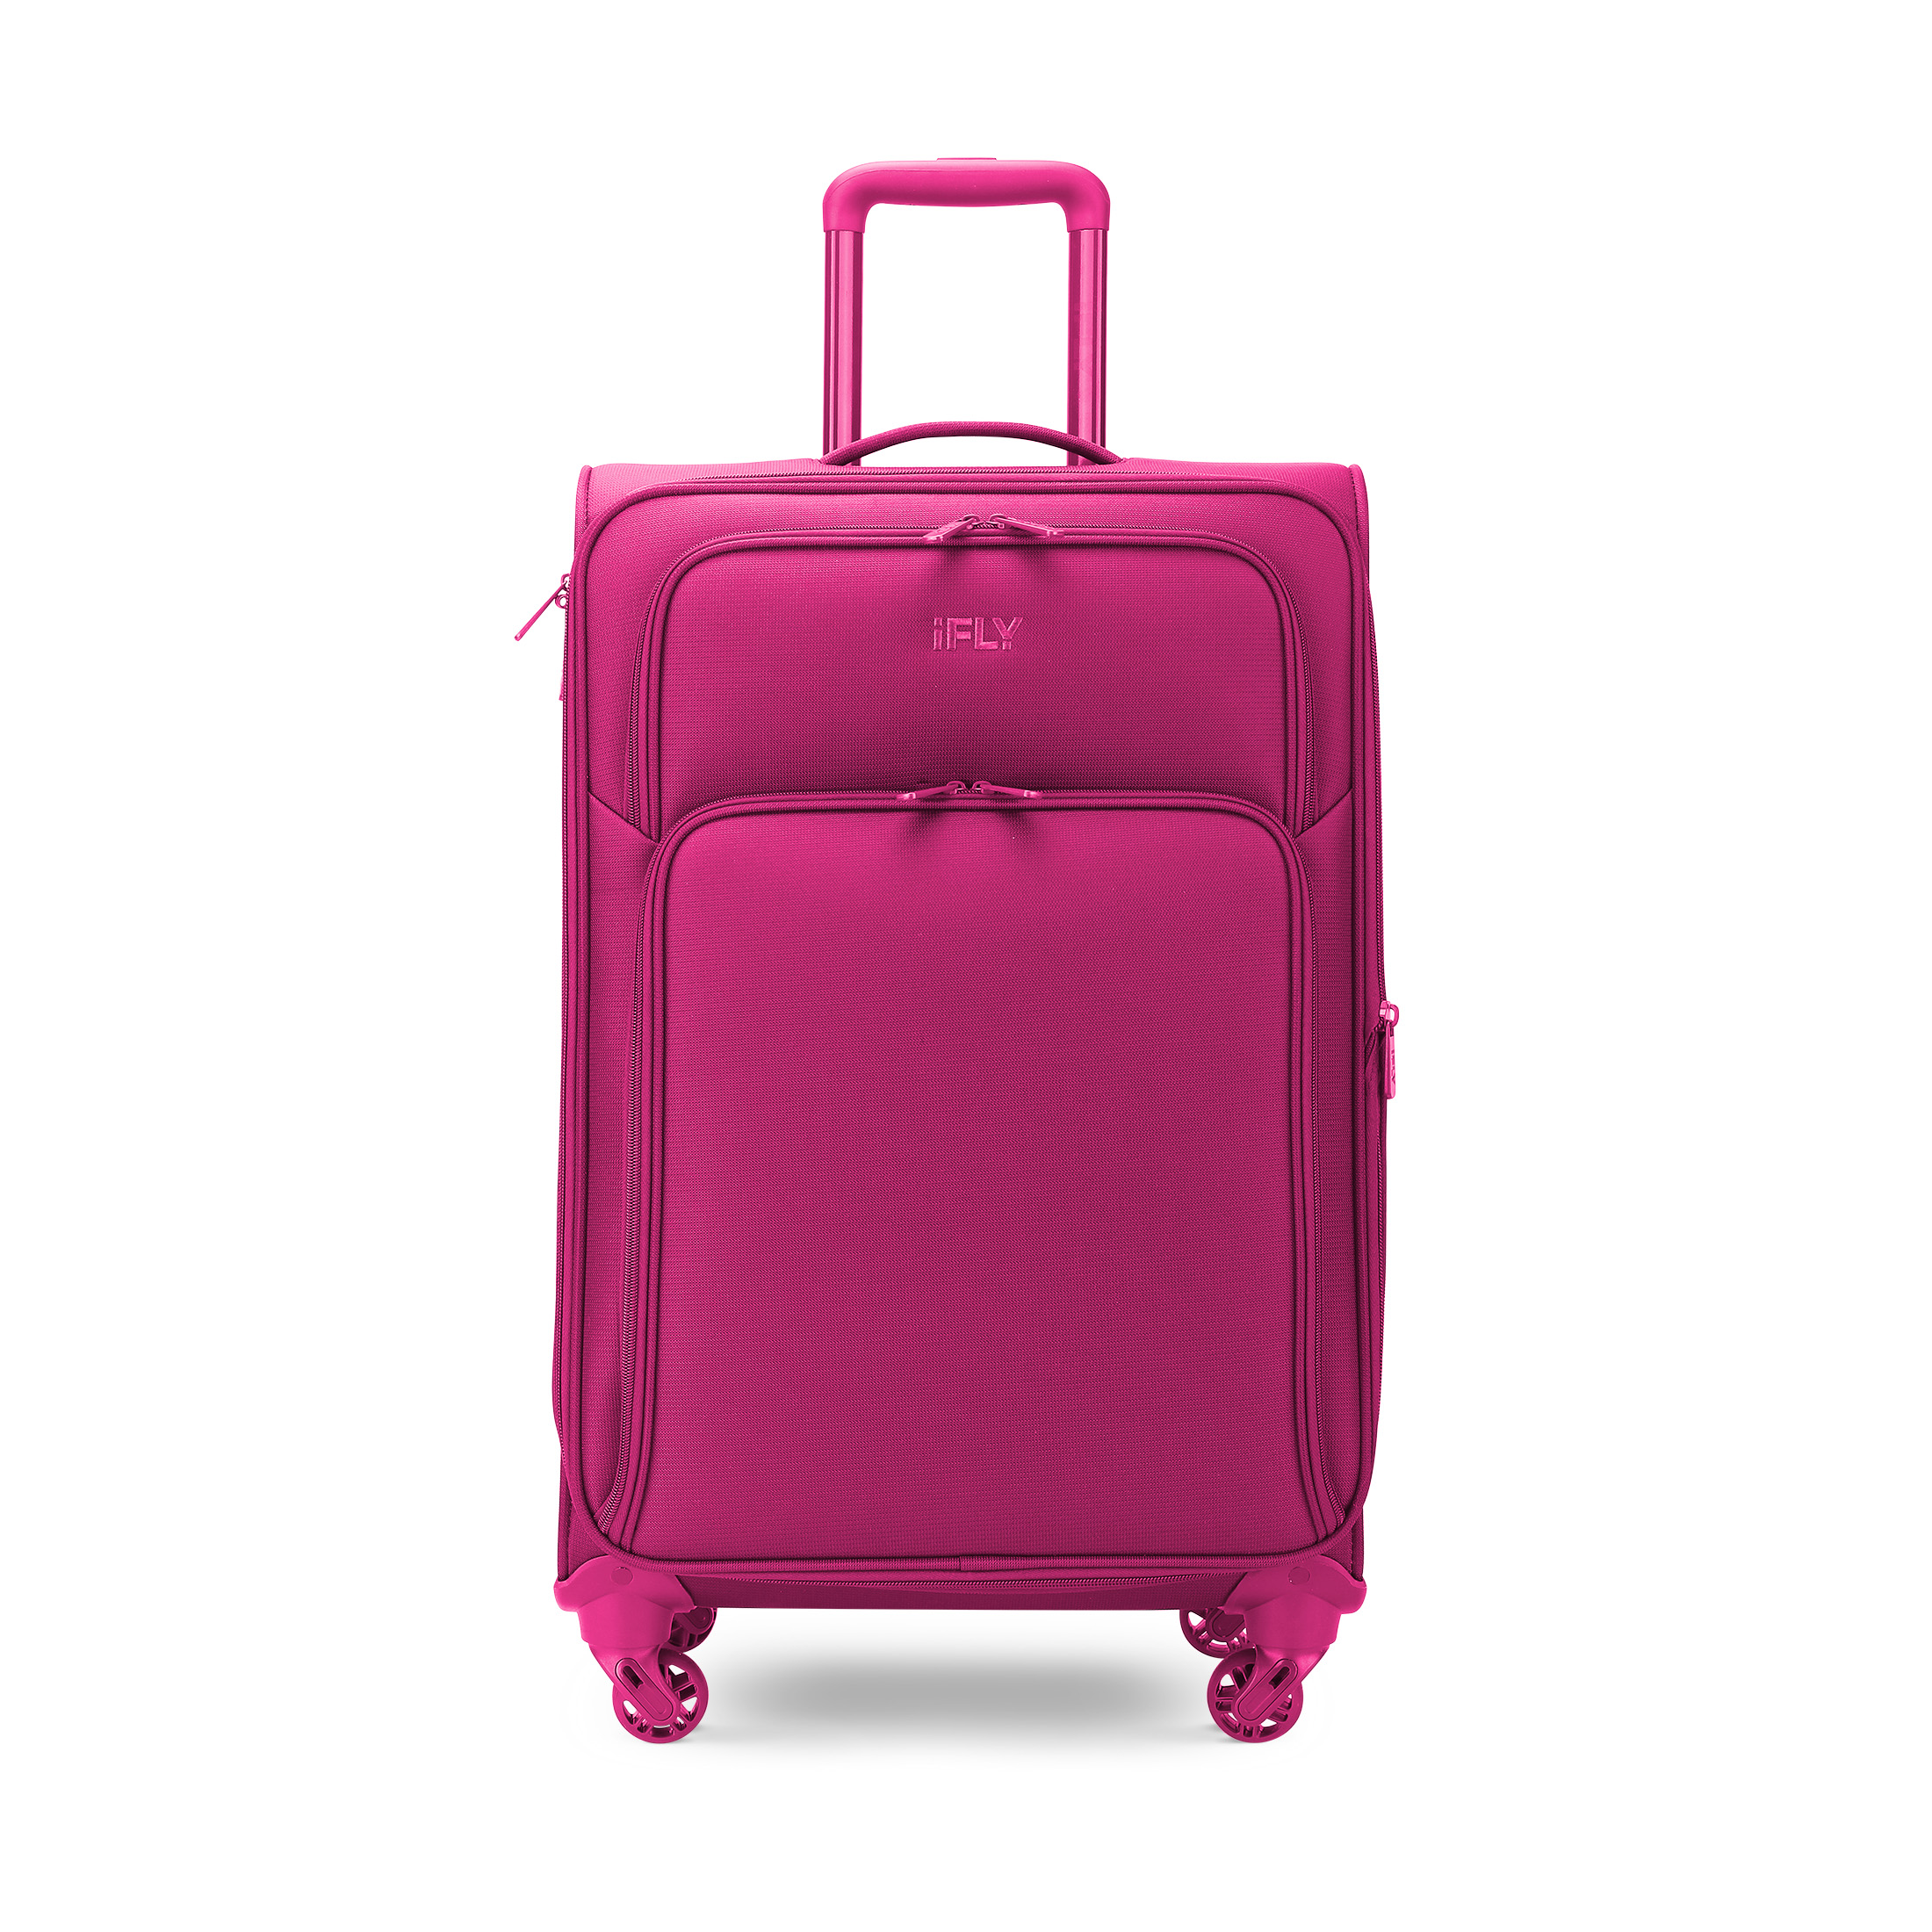 iFLY Softside Passion 24" Checked Luggage, Fuchsia - image 1 of 8